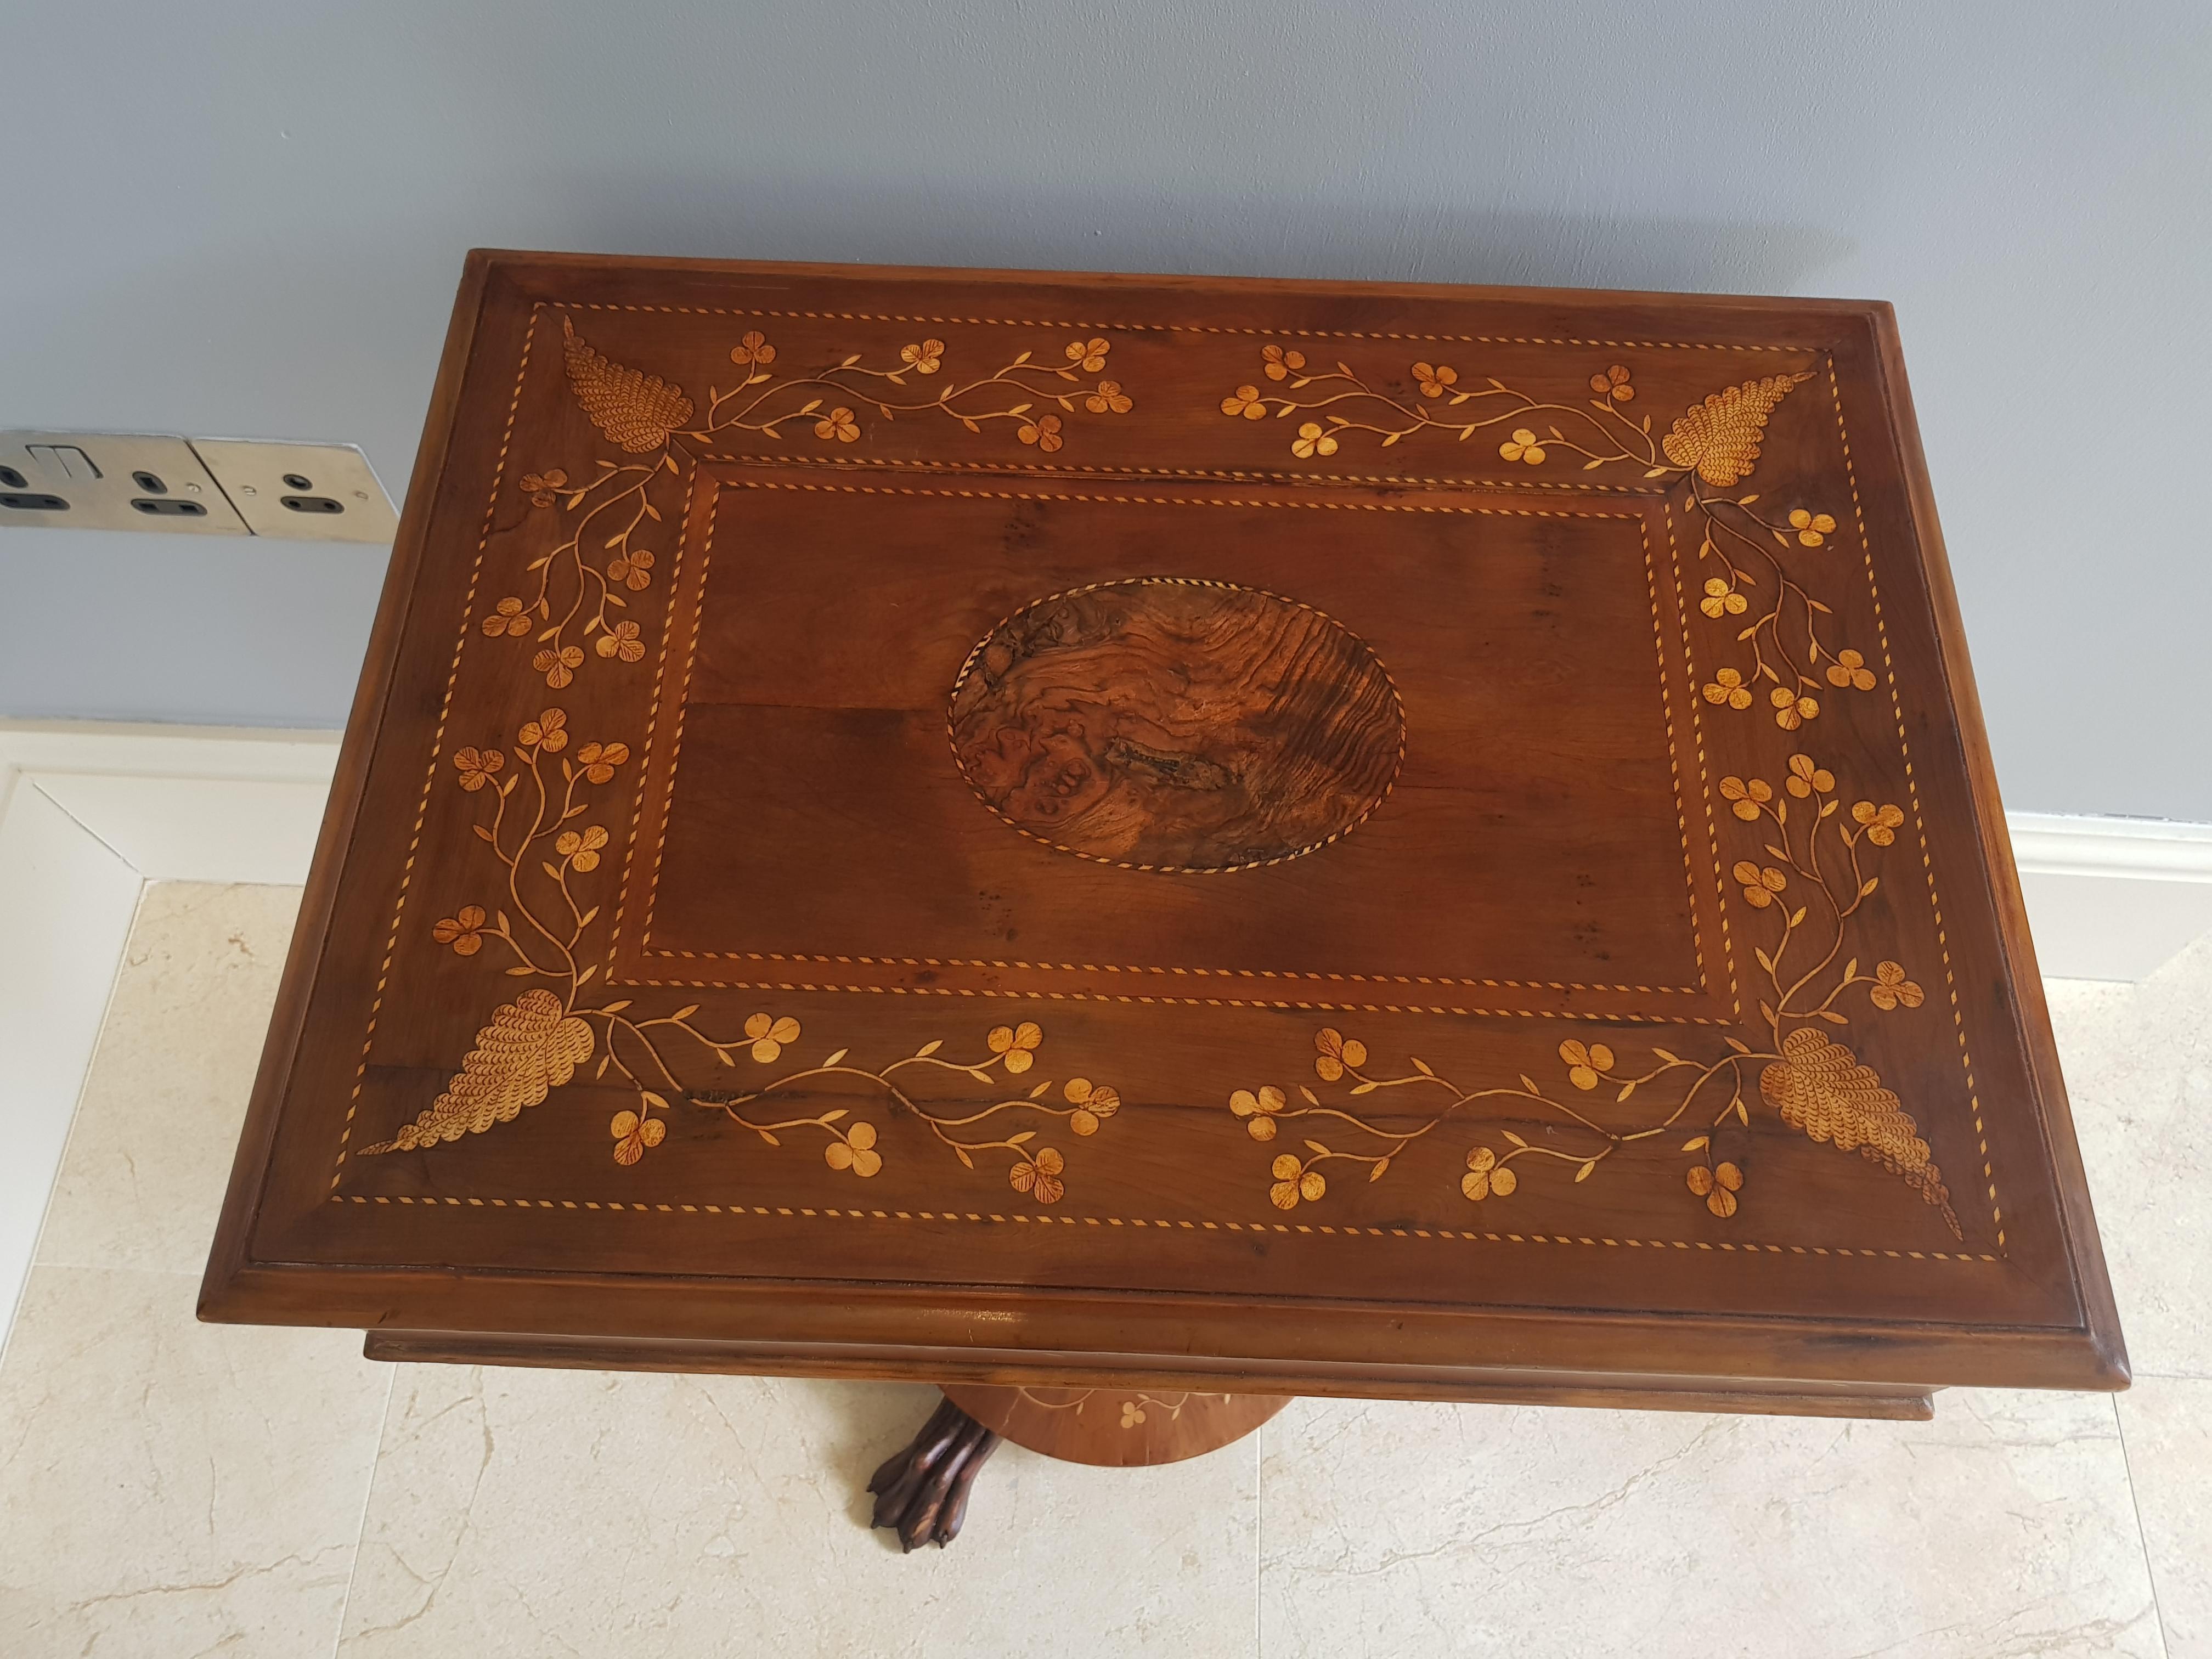 A fine example of mid-19th century Irish Killarney Marquetry Furniture.

The rectangular top ornately inlaid with shamrock and fern leaves. The lid lifts to reveal a fitted and sectioned sewing tray which lifts out to an underlying storage area.